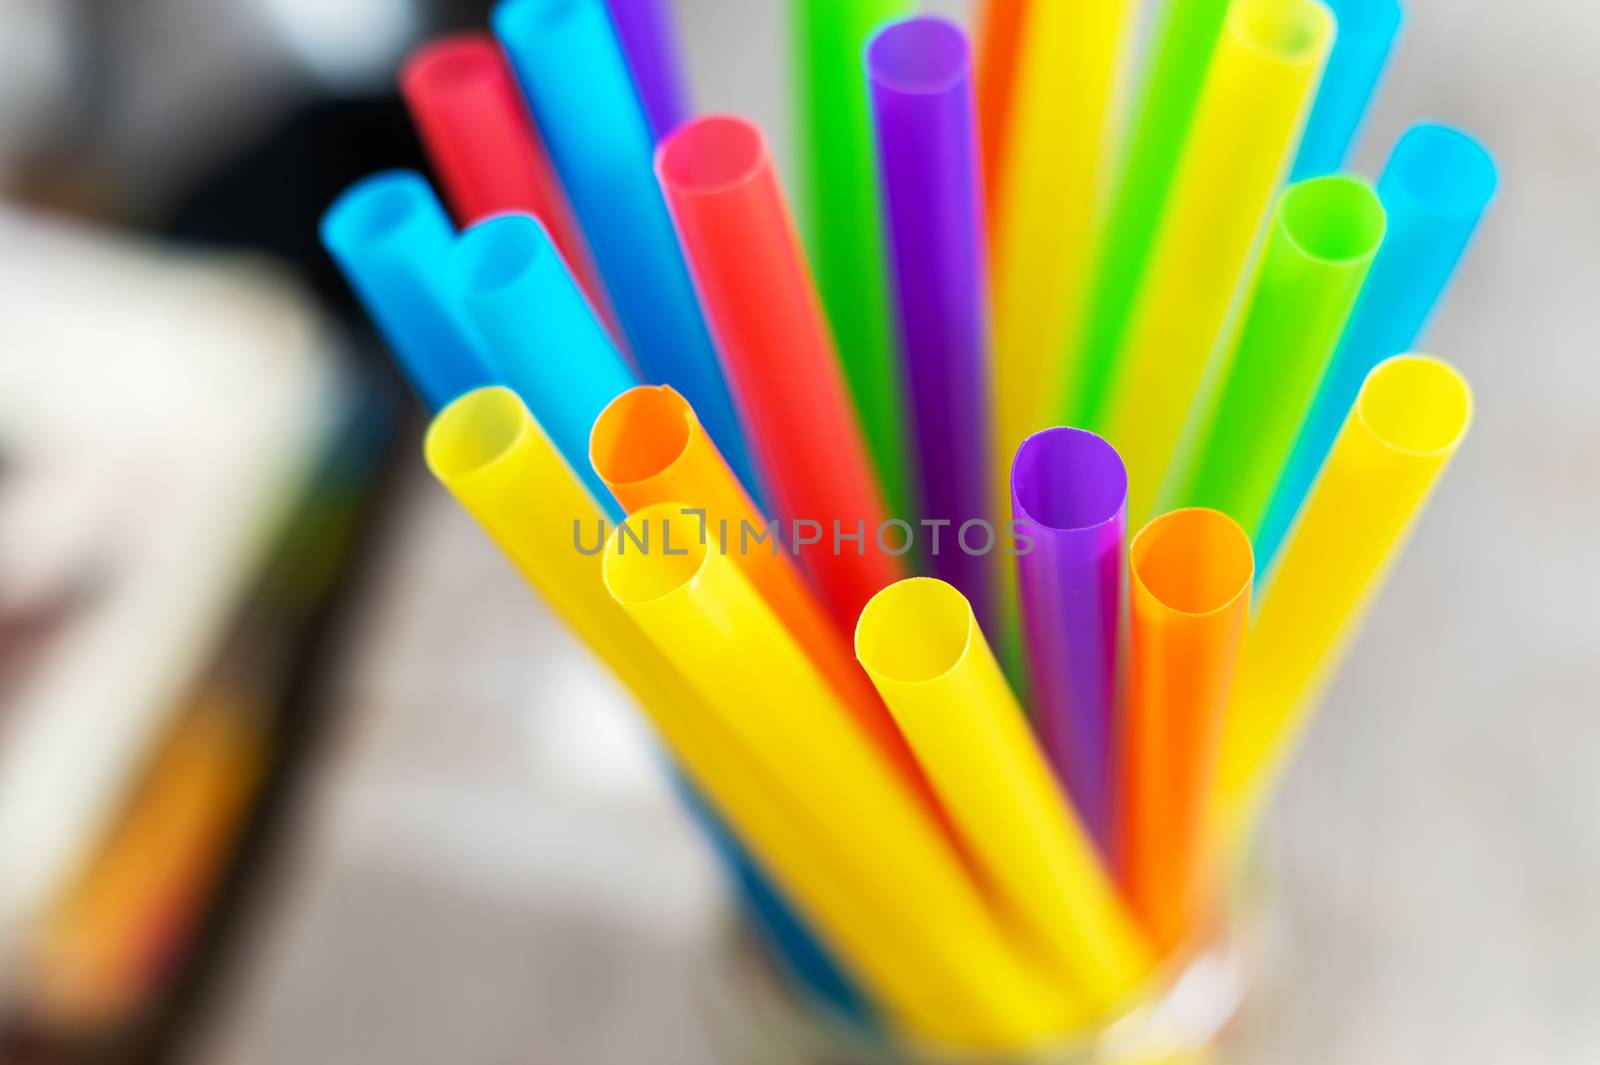 Top view of bright colorful plastic drinking straws and tubes